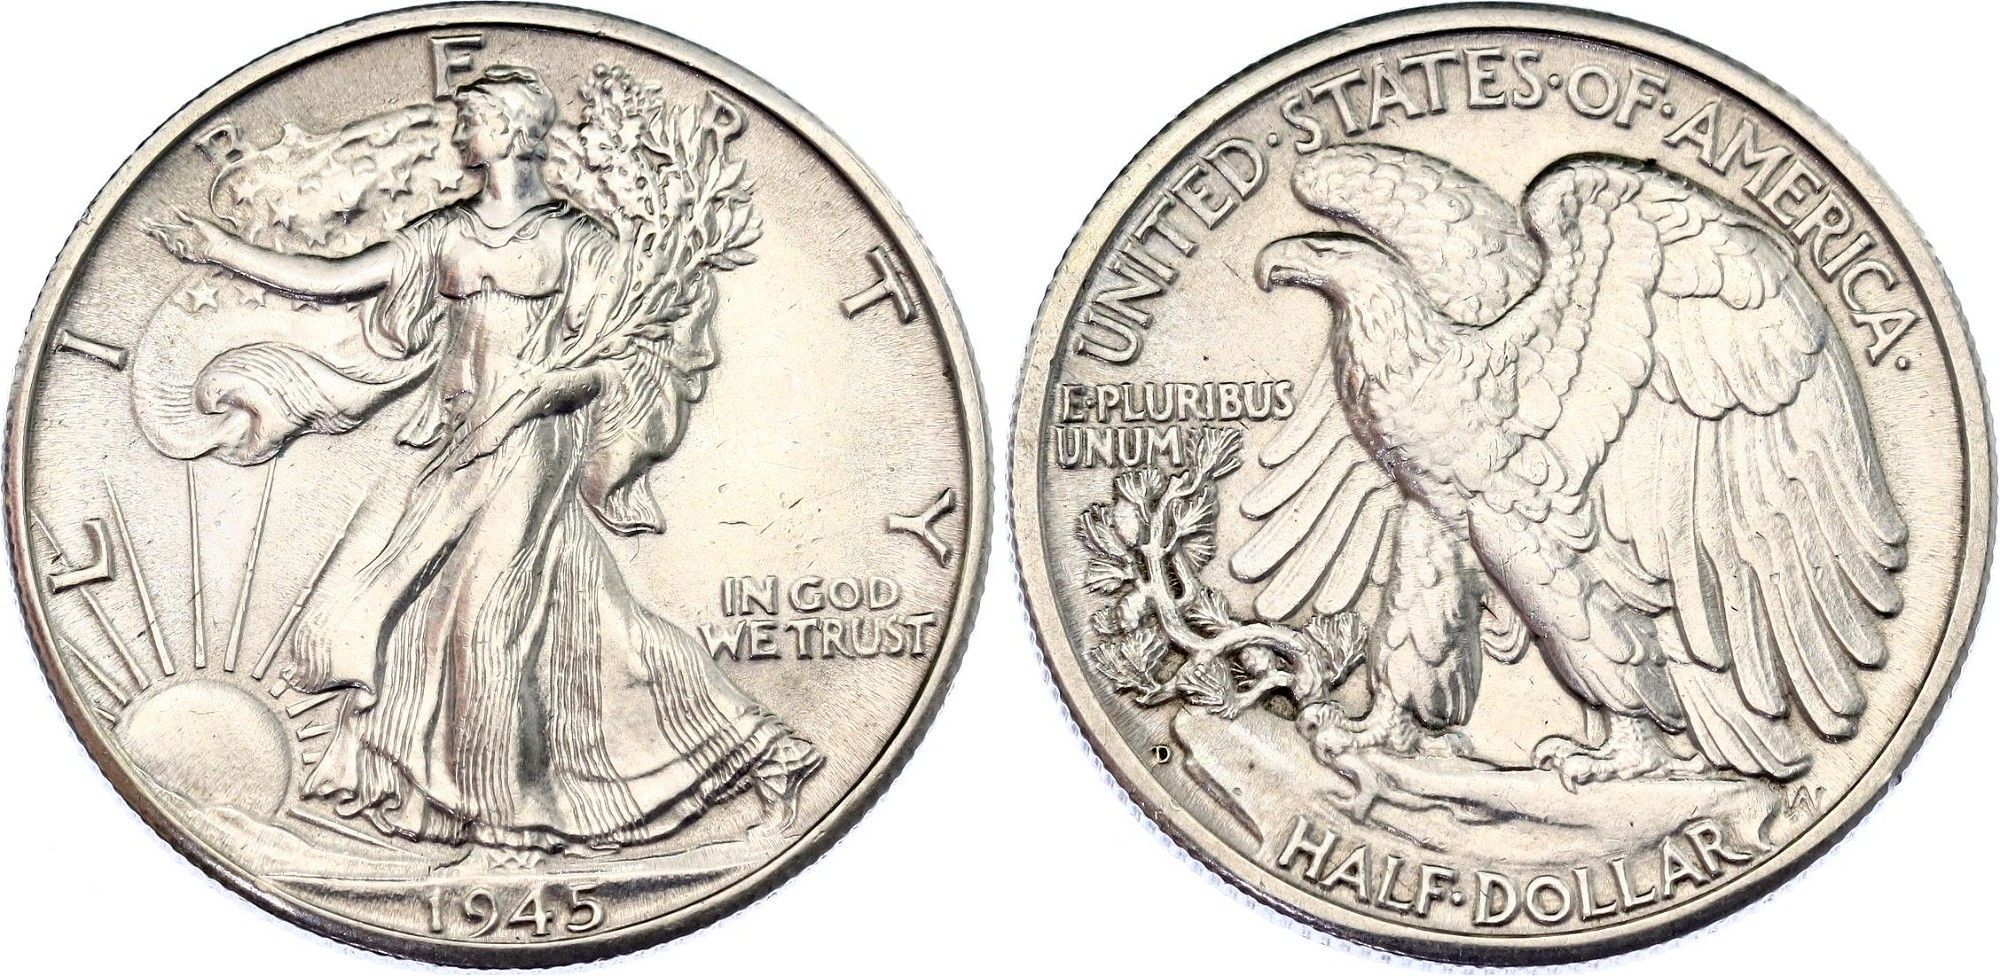 What Determines The Value of The 1945 half dollar